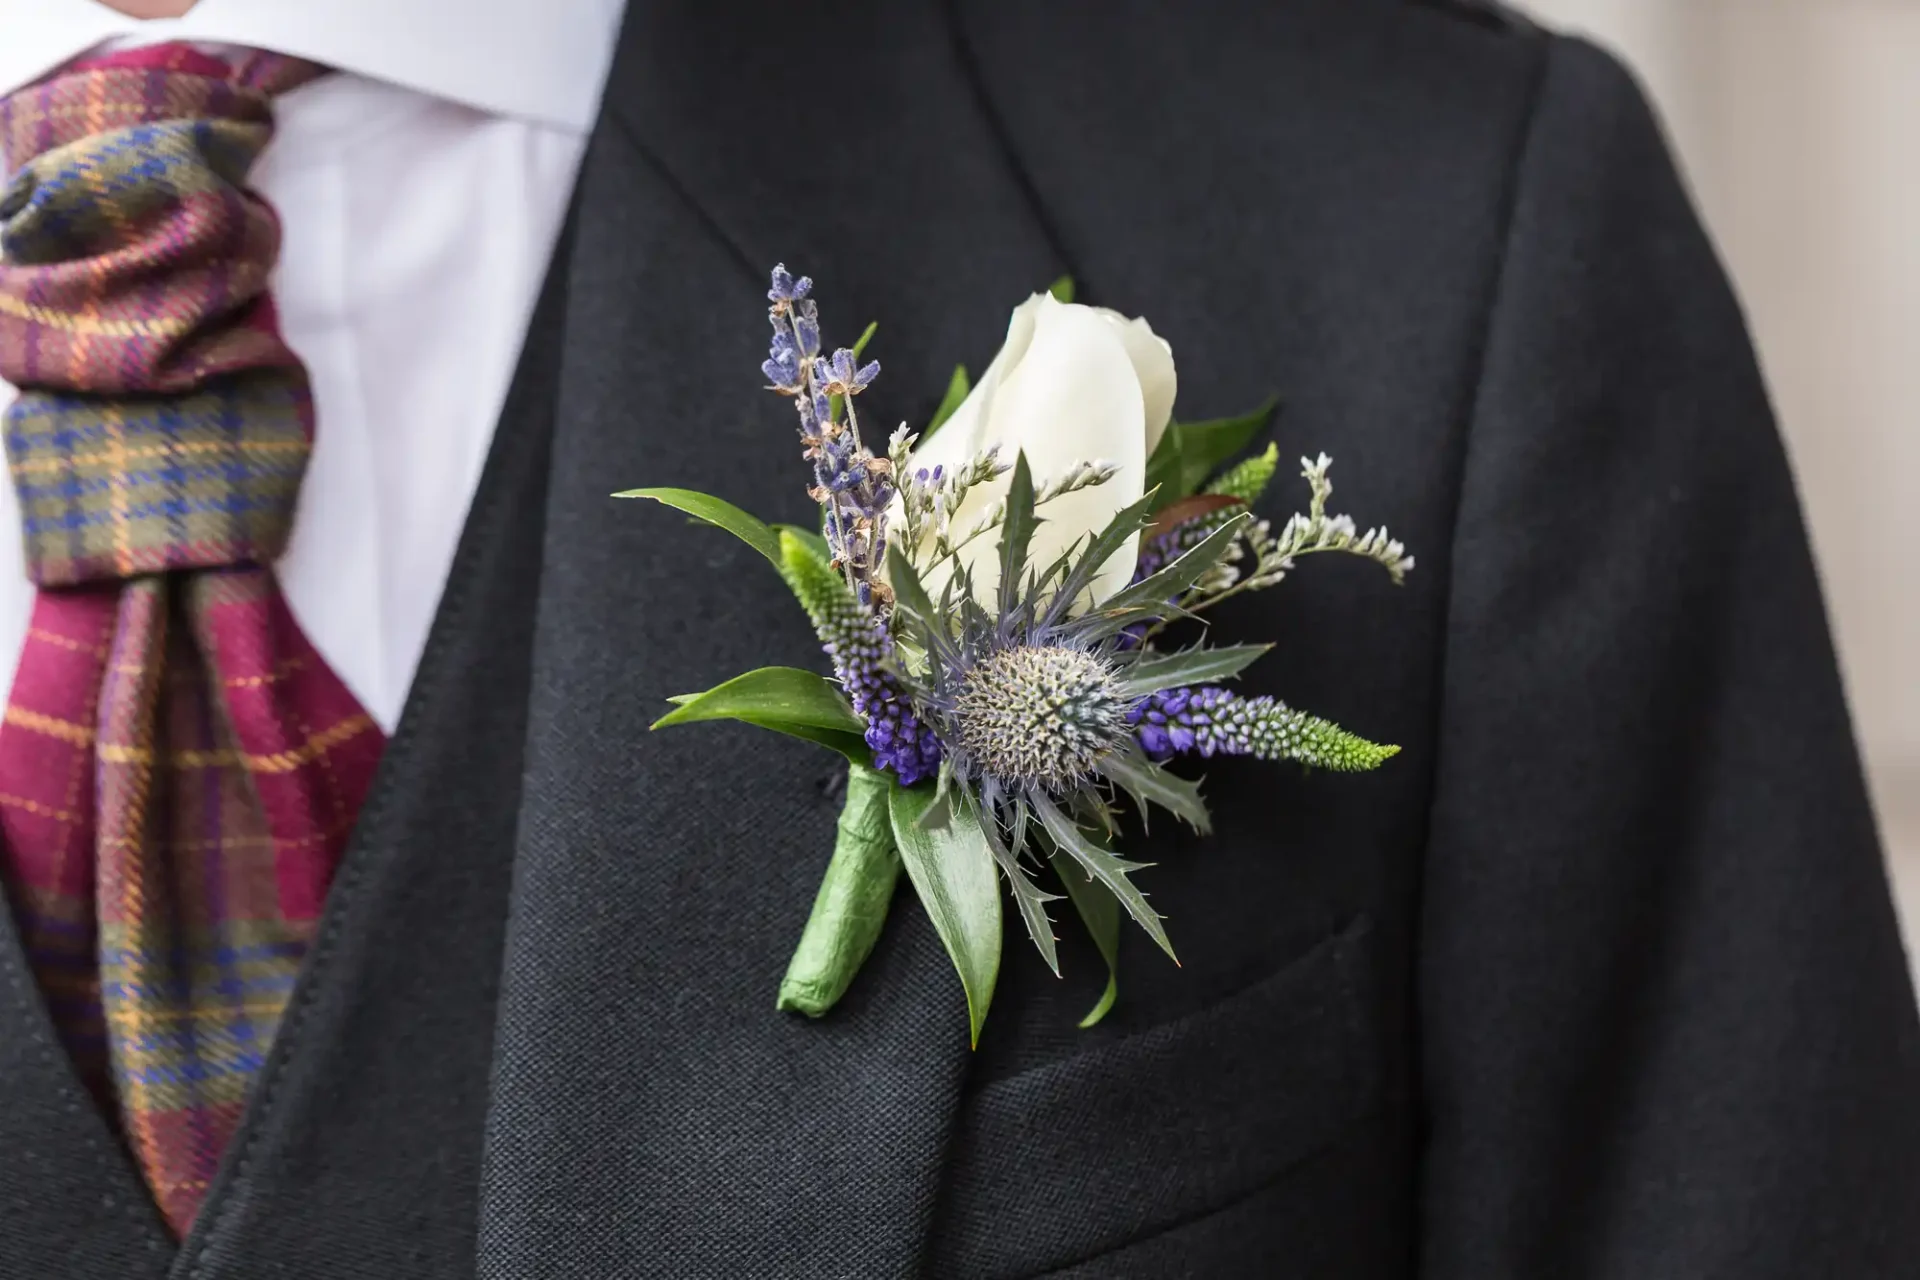 Close-up of a groom's dark suit with a white rose and lavender boutonniere, complemented by a vibrant, striped tie.